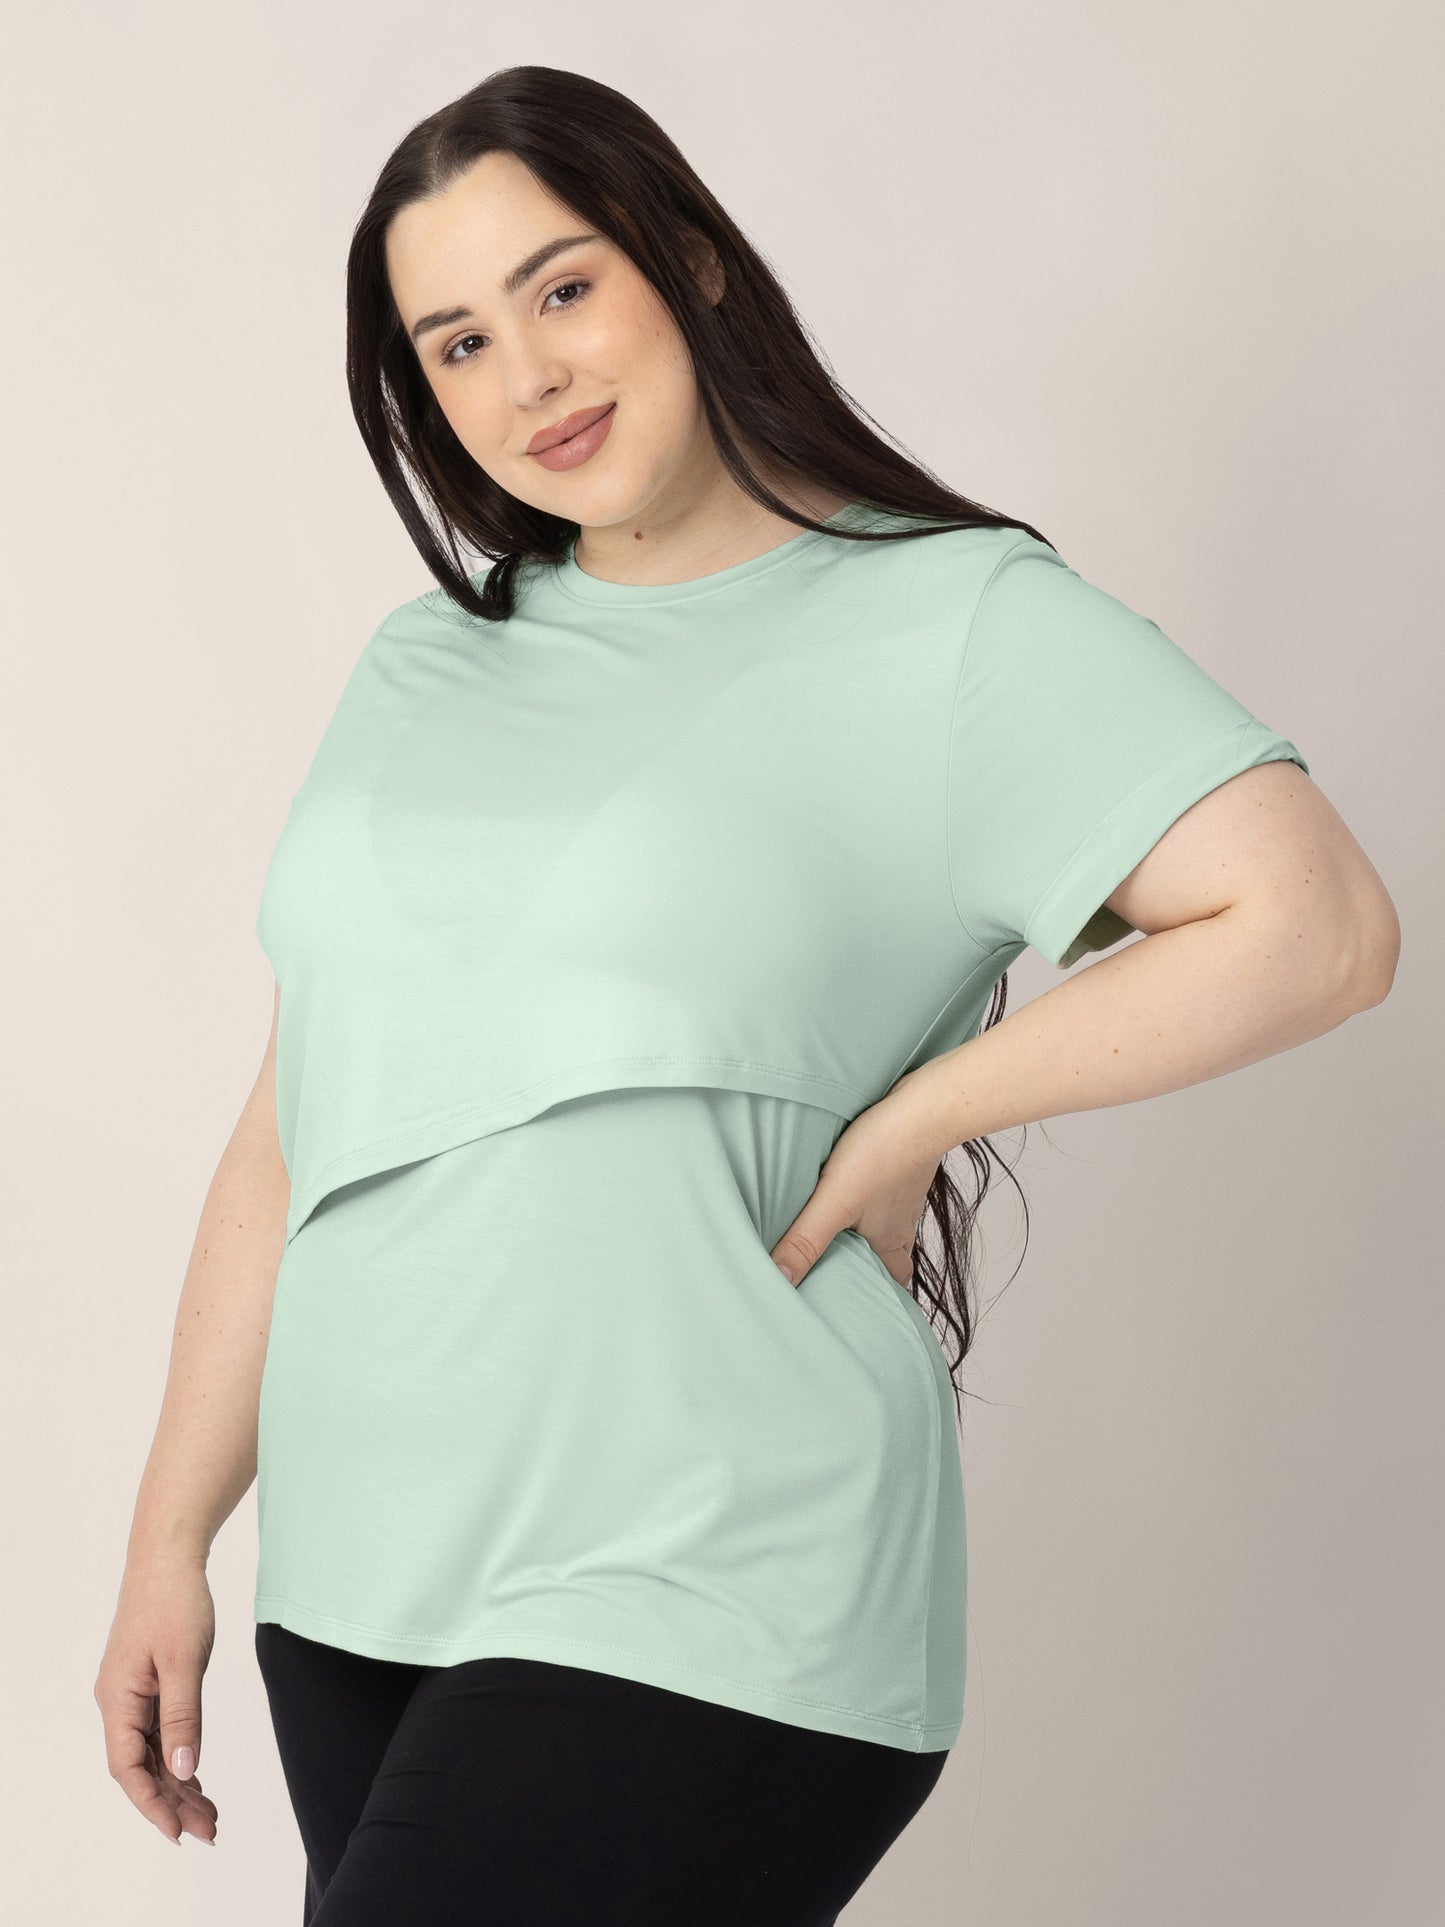 Three-quarters view of a model wearing the Everyday Asymmetrical Nursing T-shirt in Soft Mint.